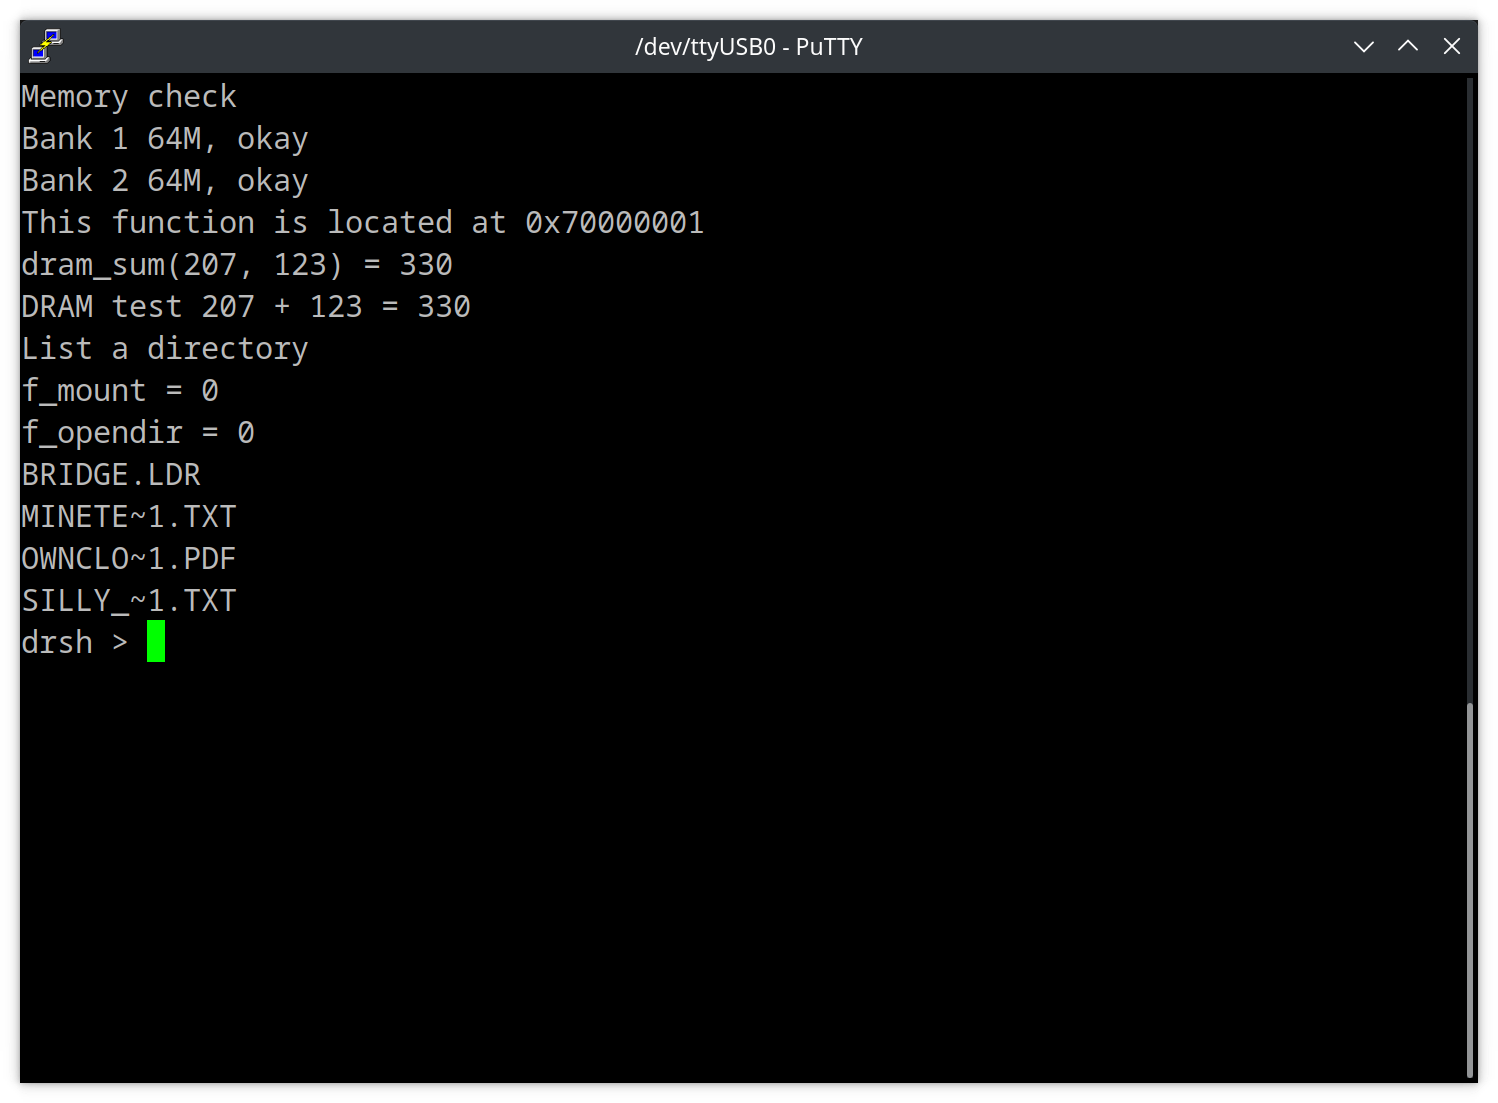 A screenshot of a PuTTY terminal with 4 short filenames listed.